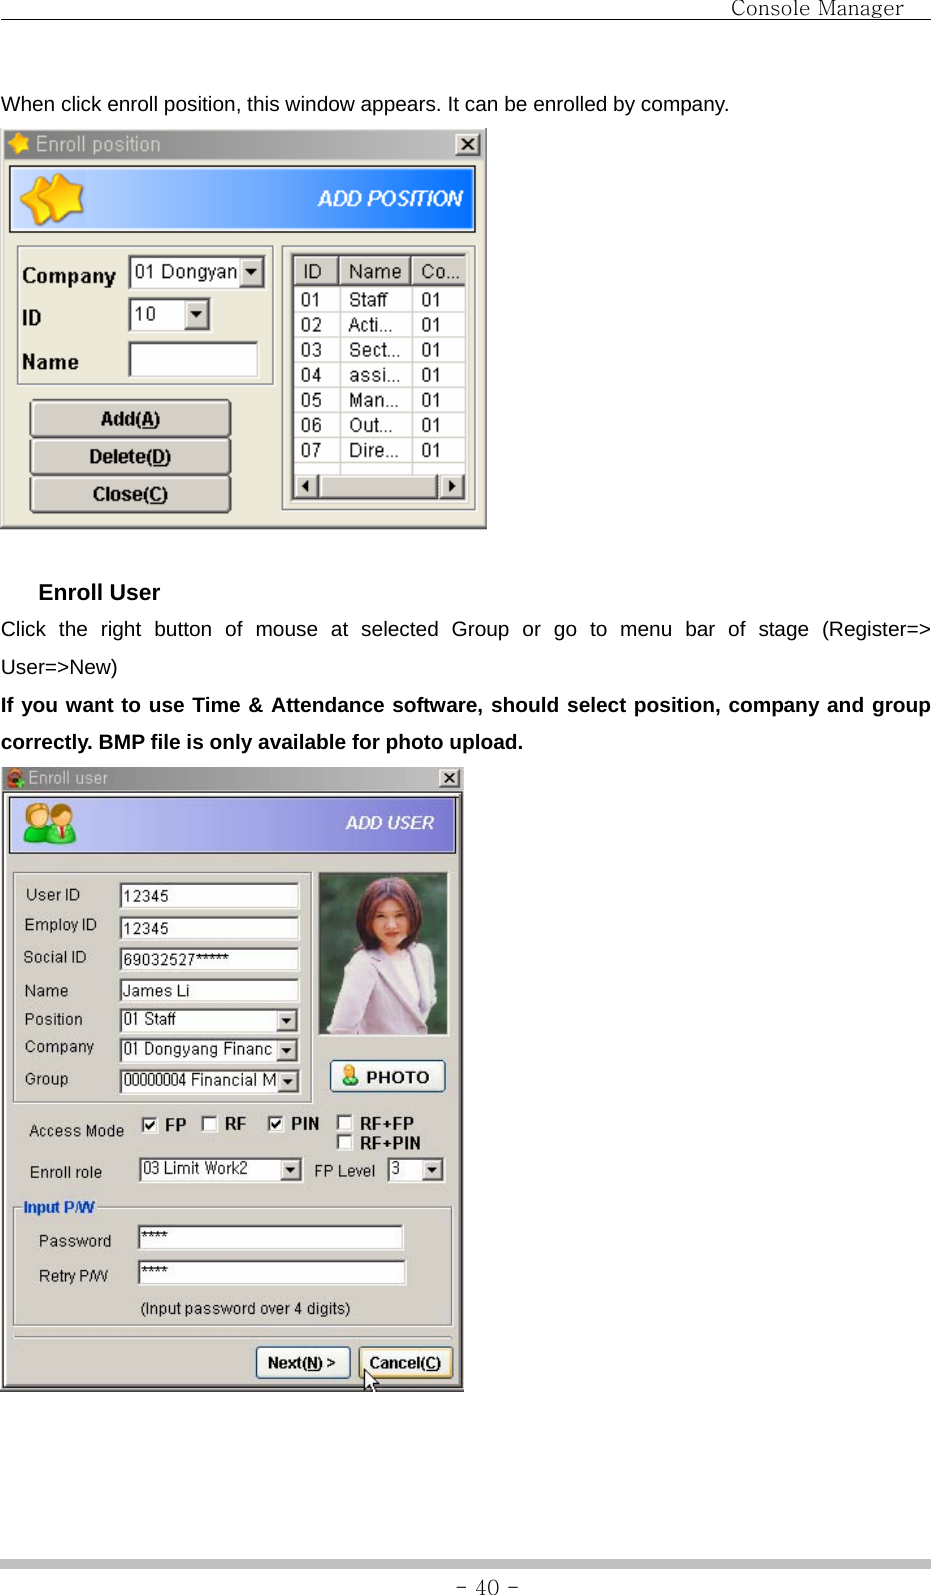                                Console Manager               - 40 -When click enroll position, this window appears. It can be enrolled by company.    Enroll User Click the right button of mouse at selected Group or go to menu bar of stage (Register=&gt; User=&gt;New) If you want to use Time &amp; Attendance software, should select position, company and group correctly. BMP file is only available for photo upload.   